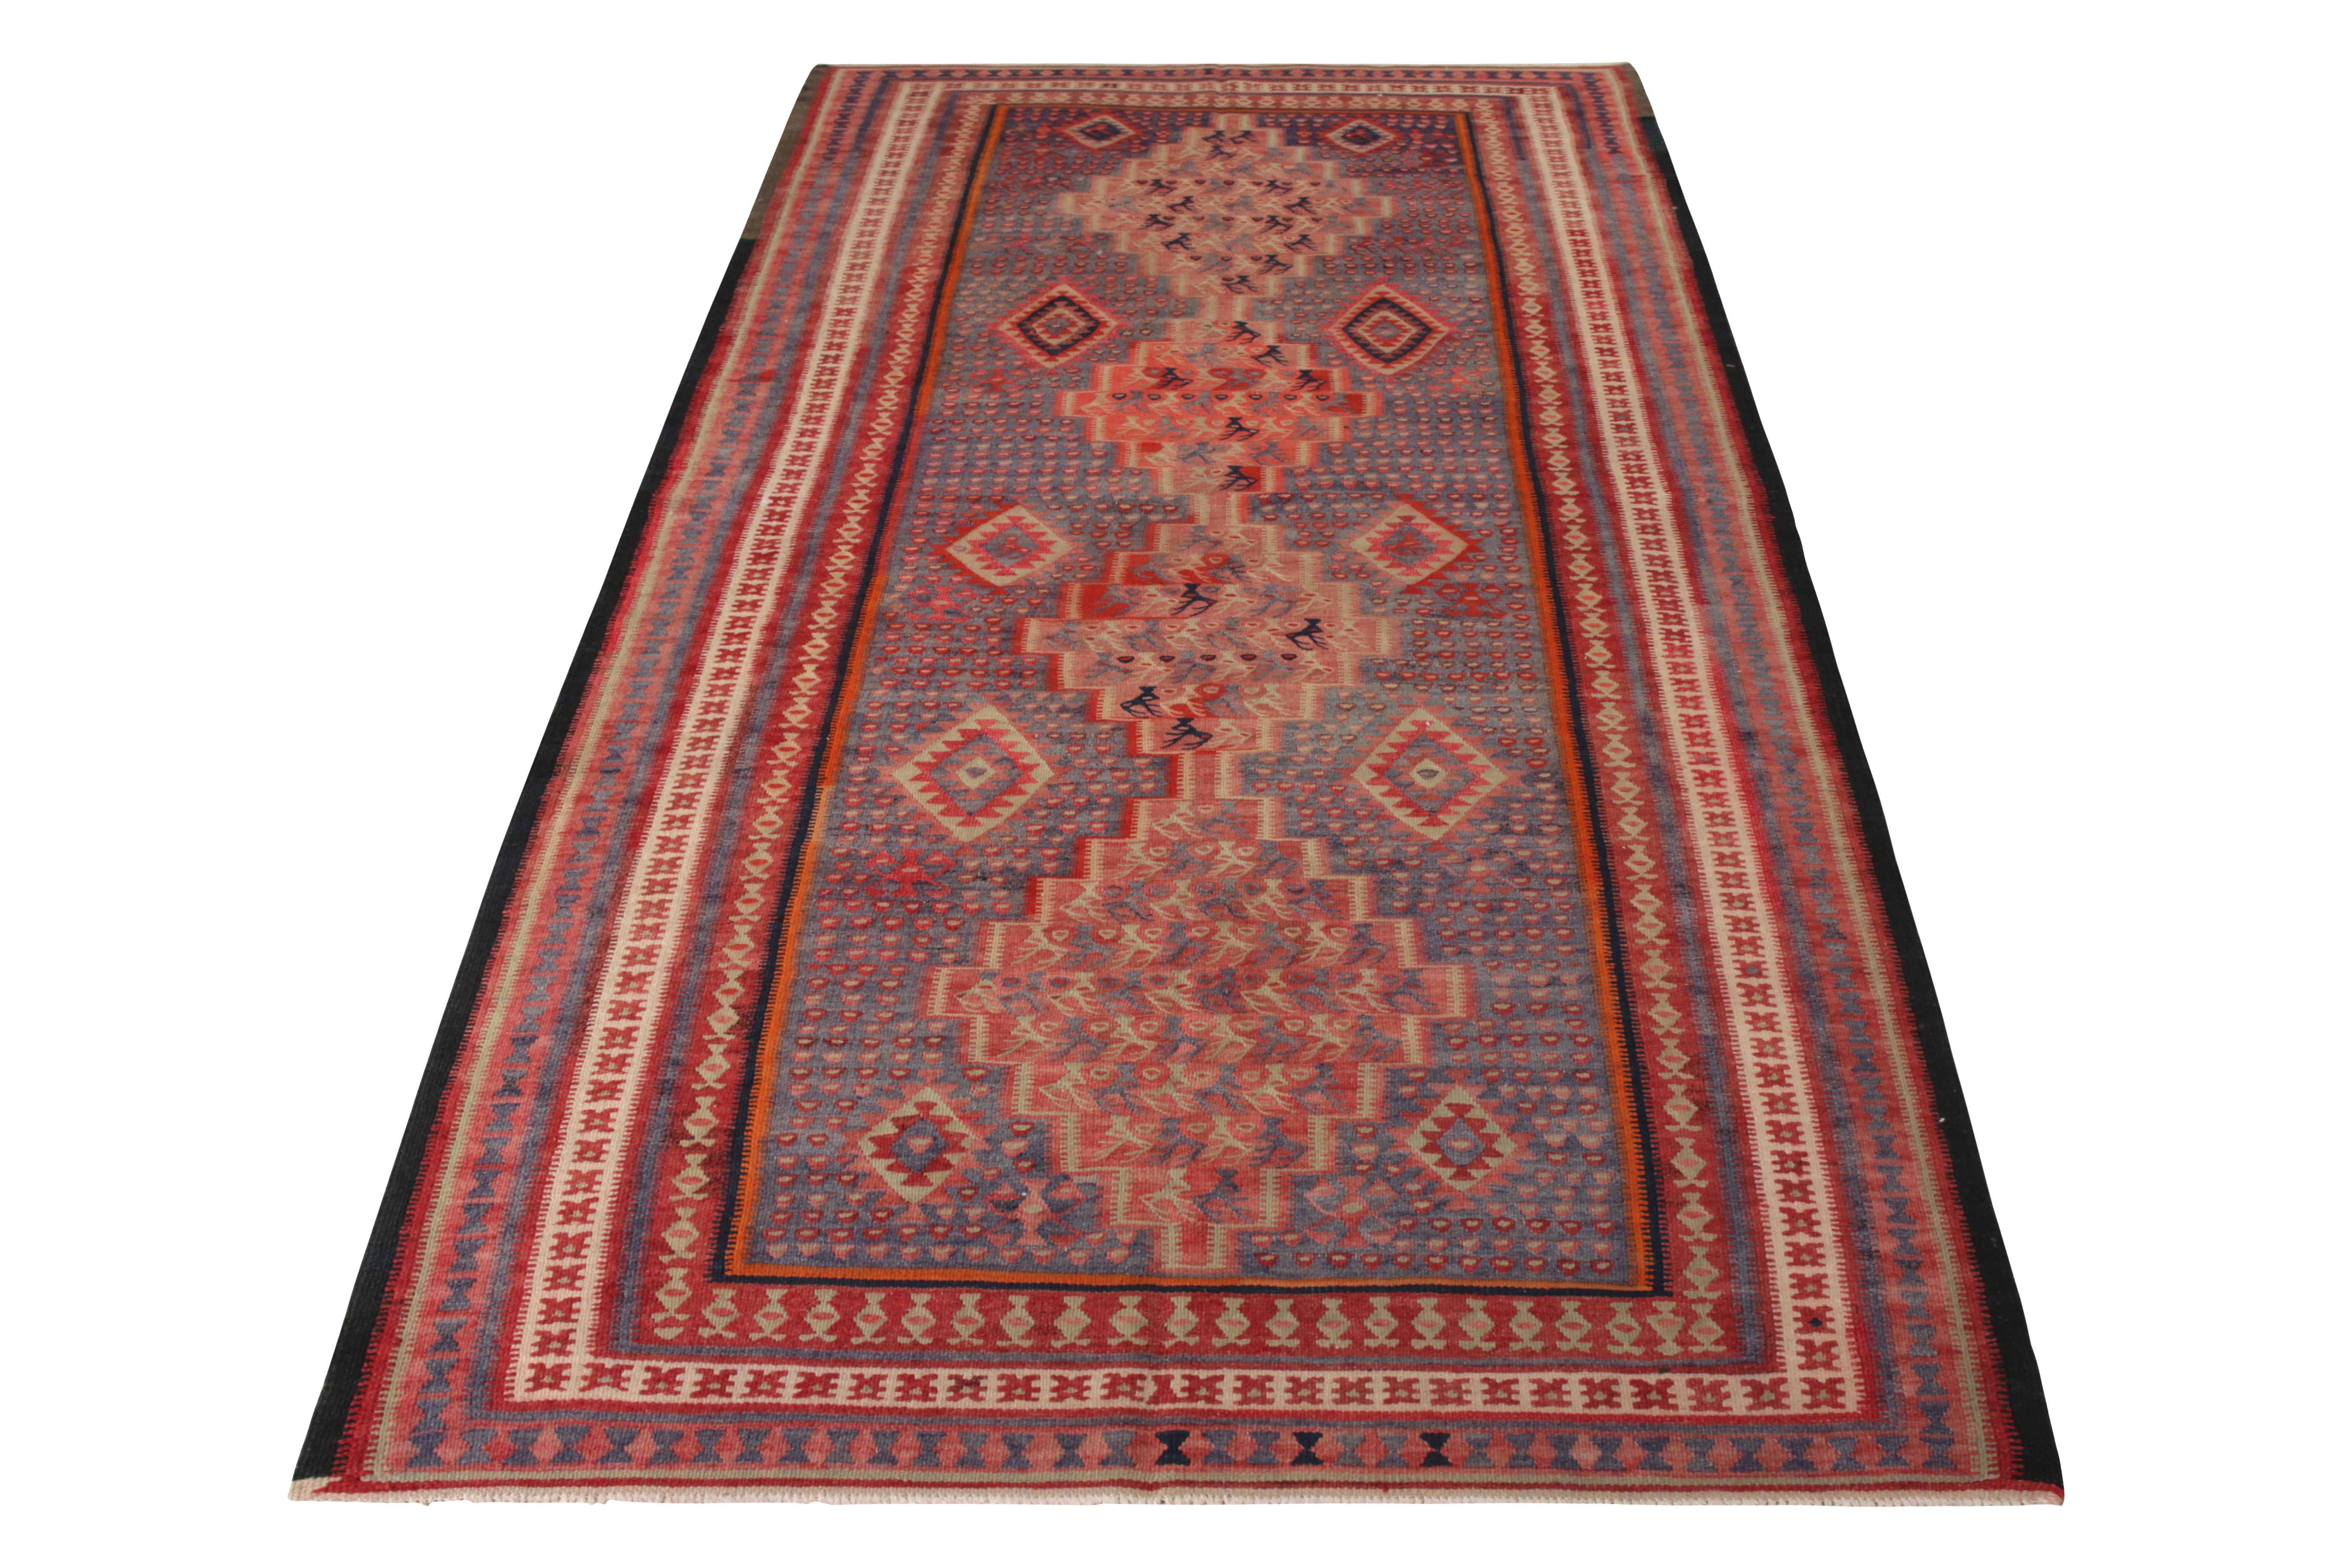 A 4x9 vintage Persian Kilim of Senneh rug design, handwoven in wool originating circa 1950-1960. Enjoying a uniquely graphic series of motifs filling the medallion pattern, playing fabulously against predominant reds and blues. Exemplifying the